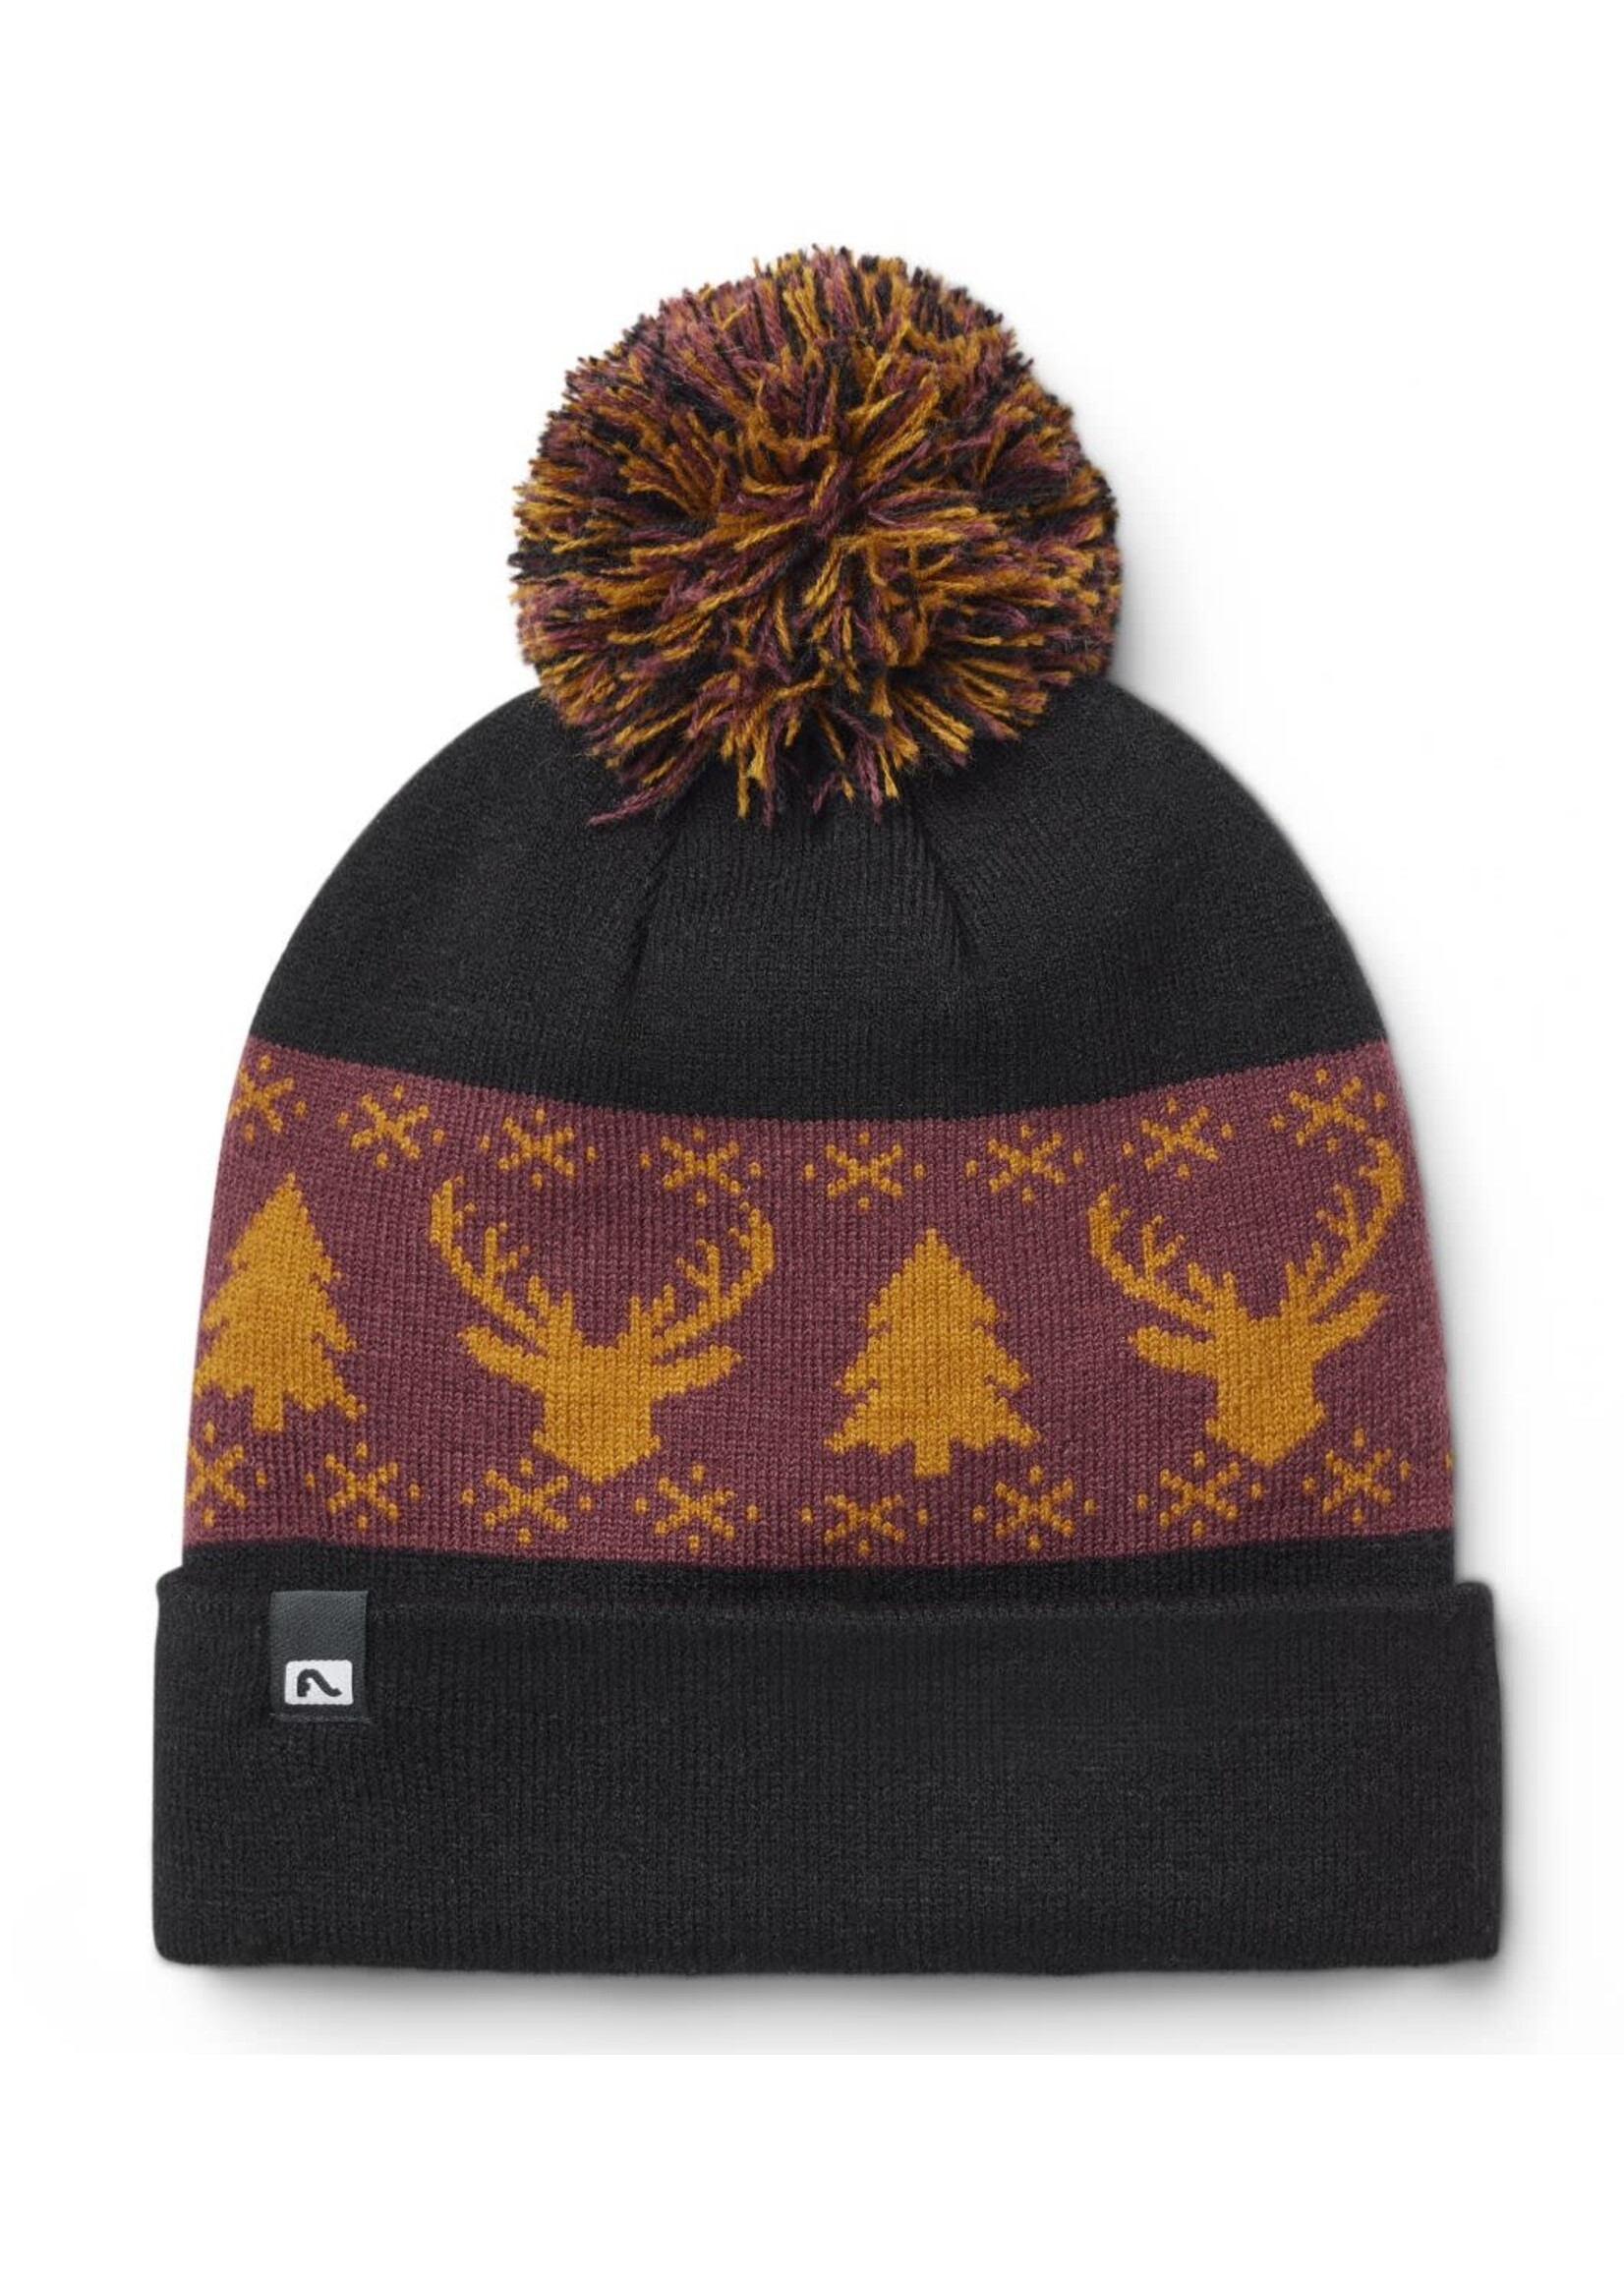 Flylow Tuque Flylow Revival Pom